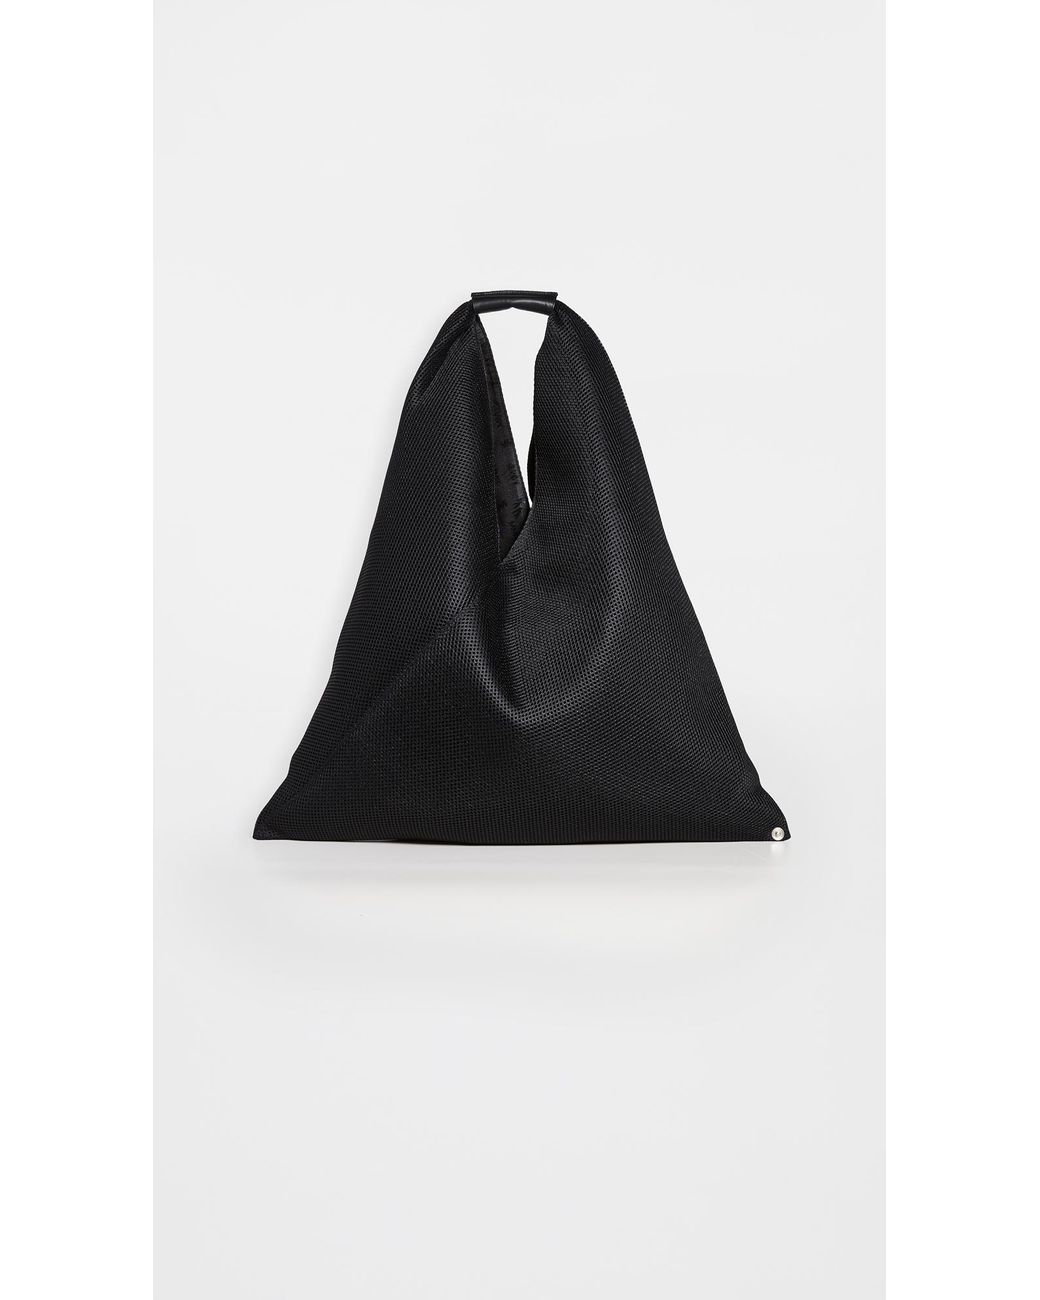 MM6 by Maison Martin Margiela Classic Net Triangle Tote in Black